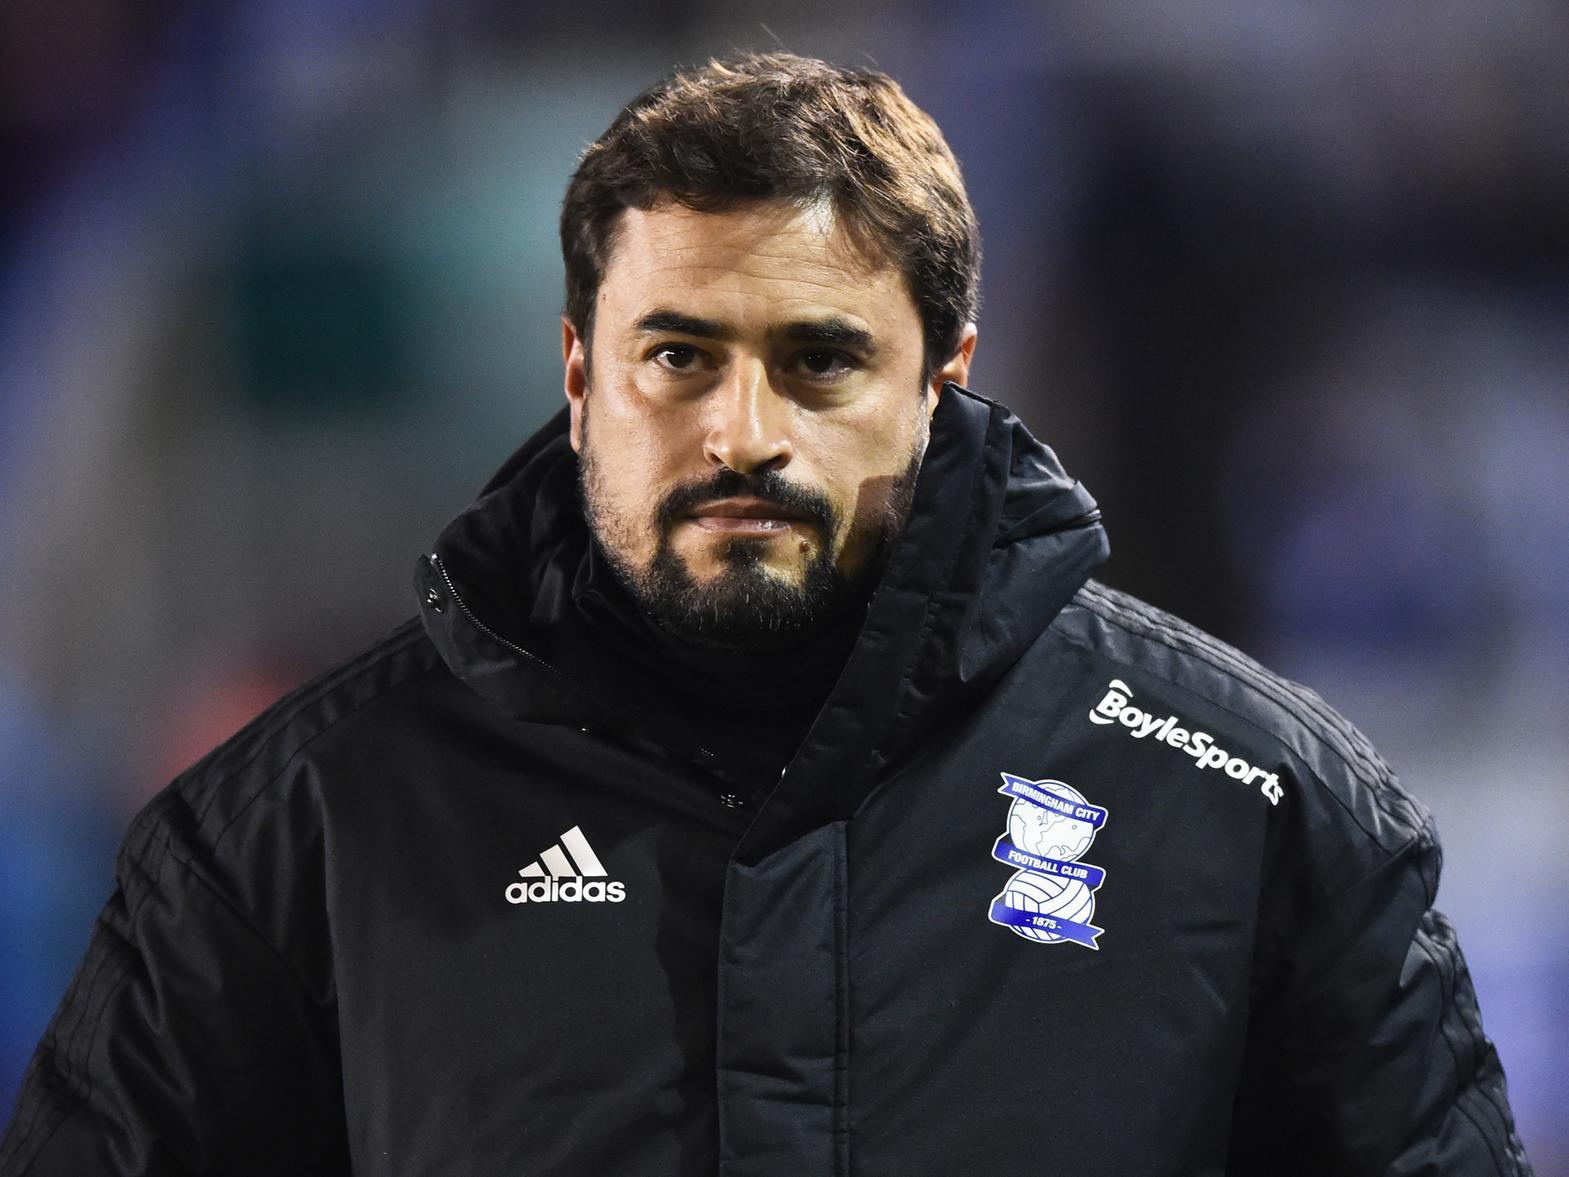 Following Garry Monk's comments about Birmingham City's Pep Clotet in his pre-match press conference, the Blues' official Twitter account questioned his decision to brand their boss as an "interim caretaker head coach". (BCFC Twitter)